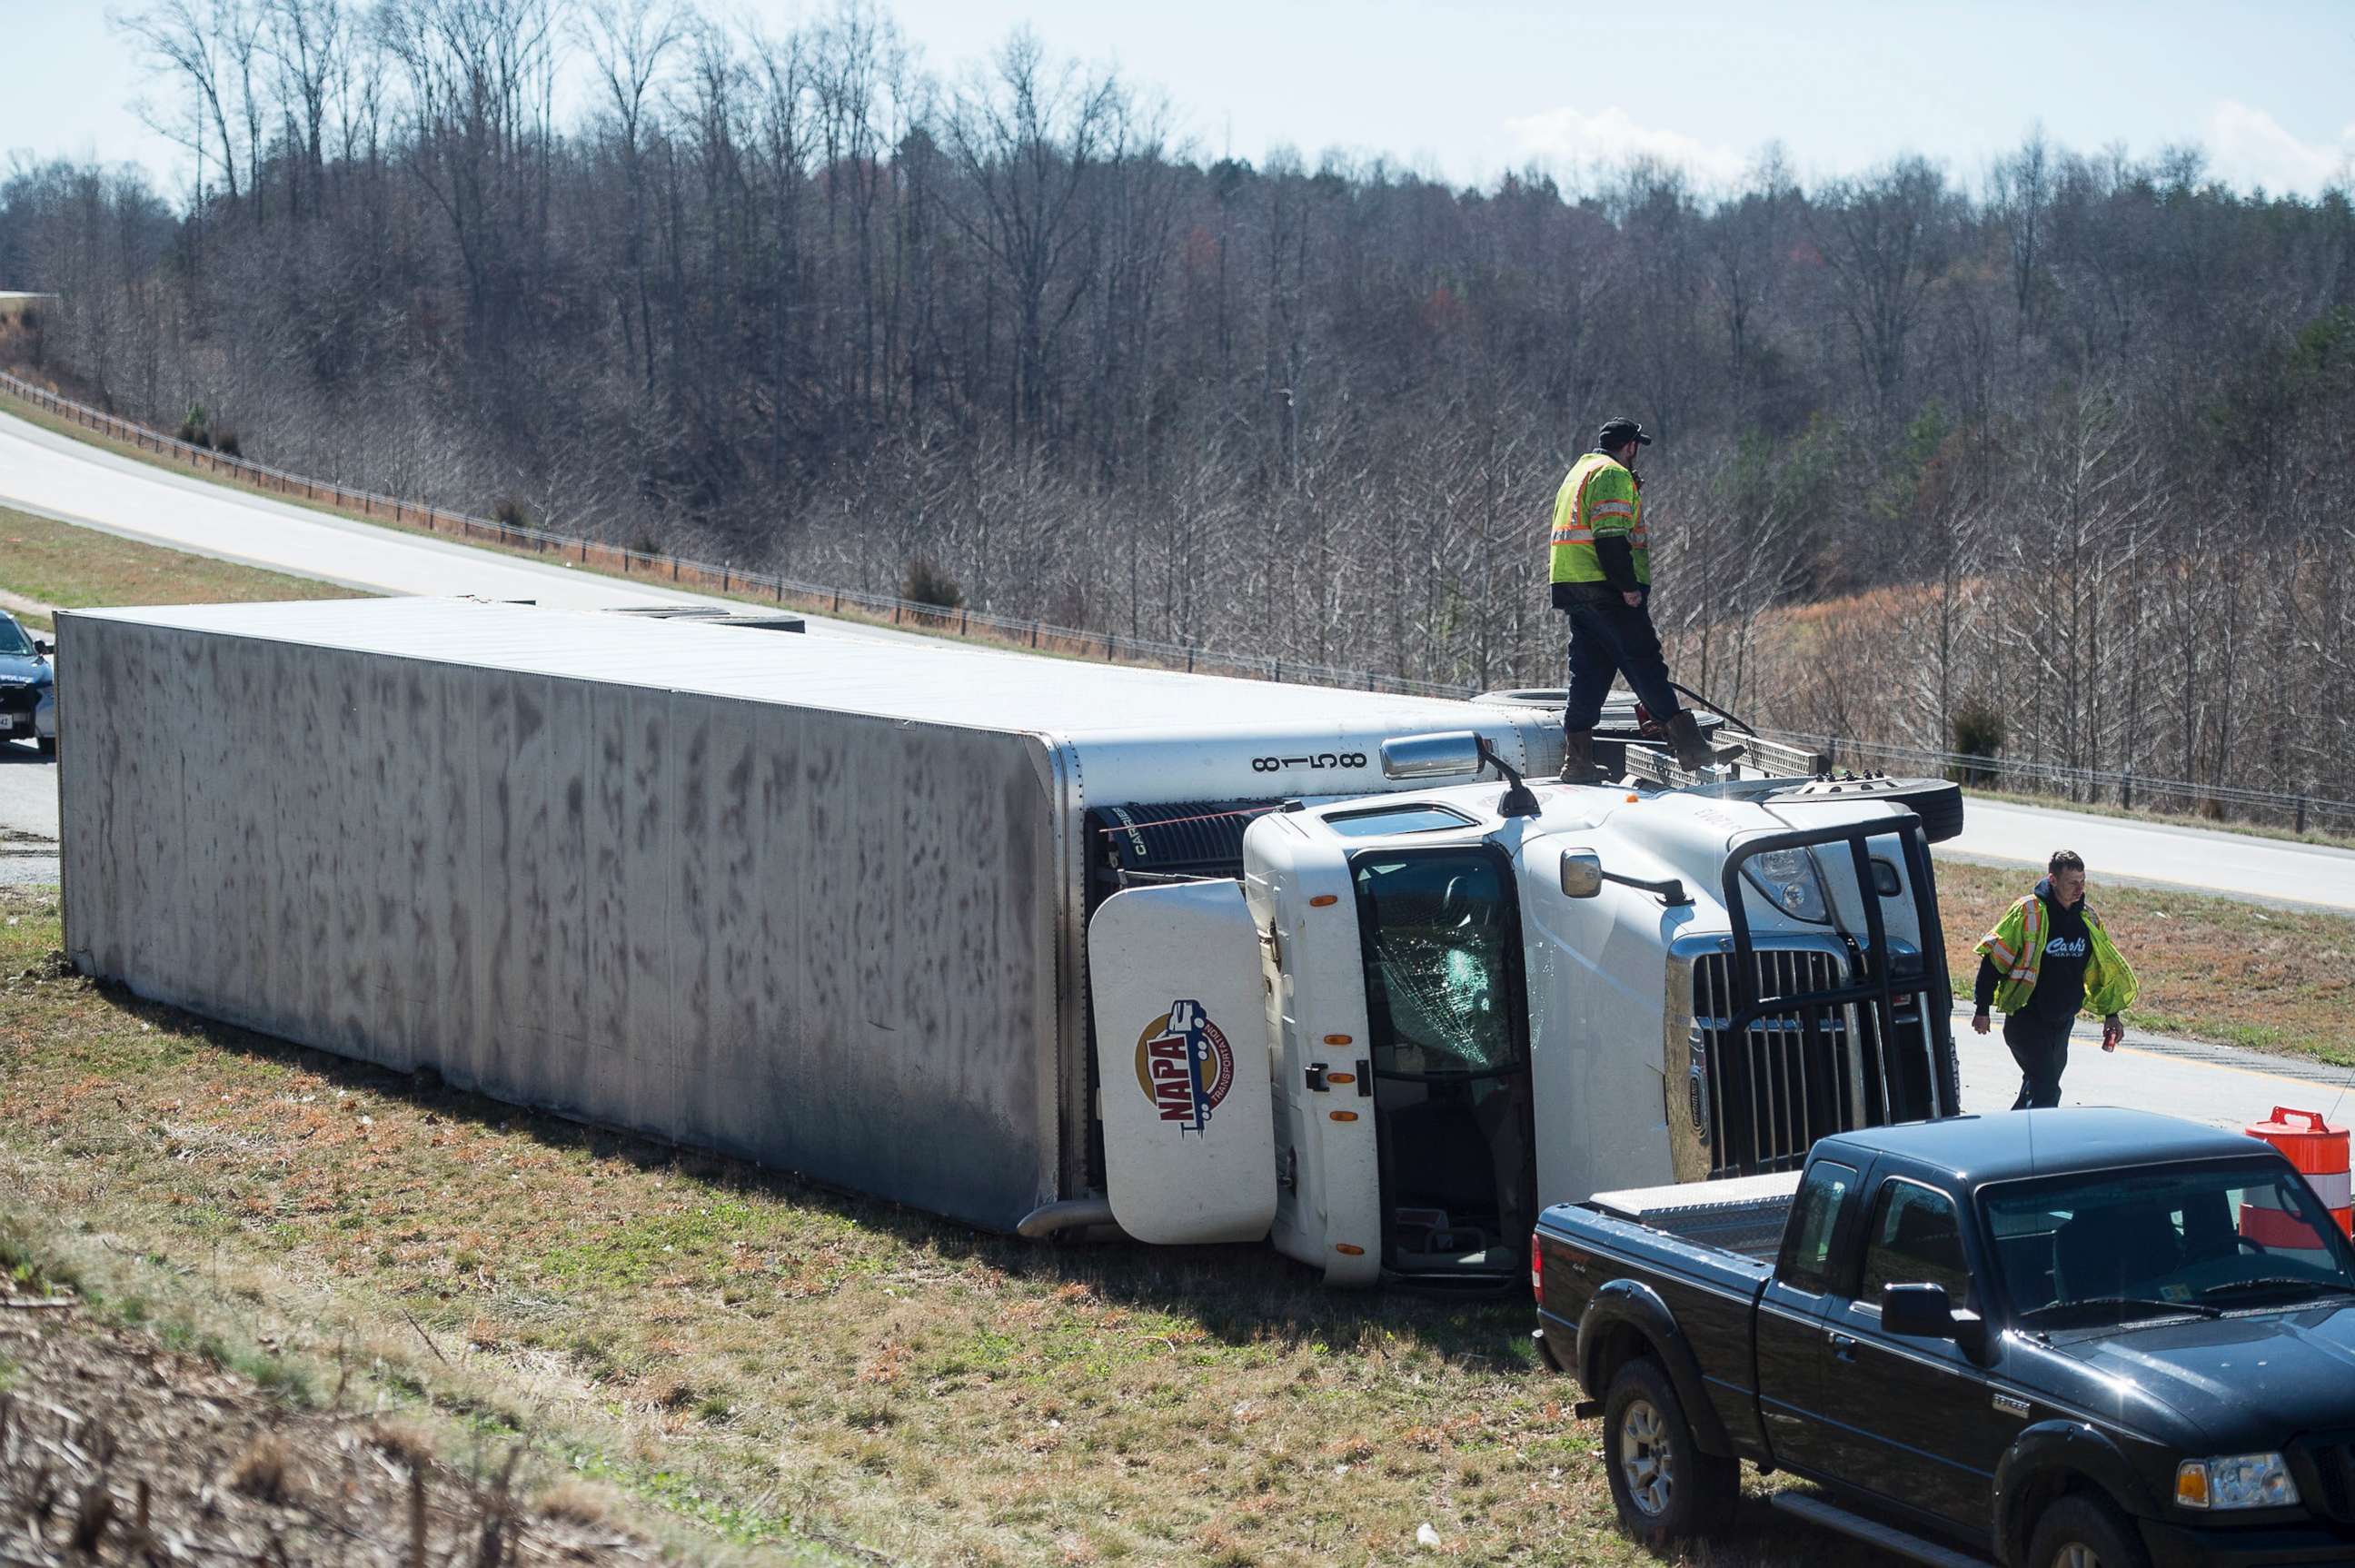 PHOTO: Fuel is siphoned from an overturned tractor-trailer on northbound 29 in Amhesrt, Va., March 2, 2018. Virginia's coast is bracing for possible flooding in the wake of the nor'easter that slammed into the East Coast. 